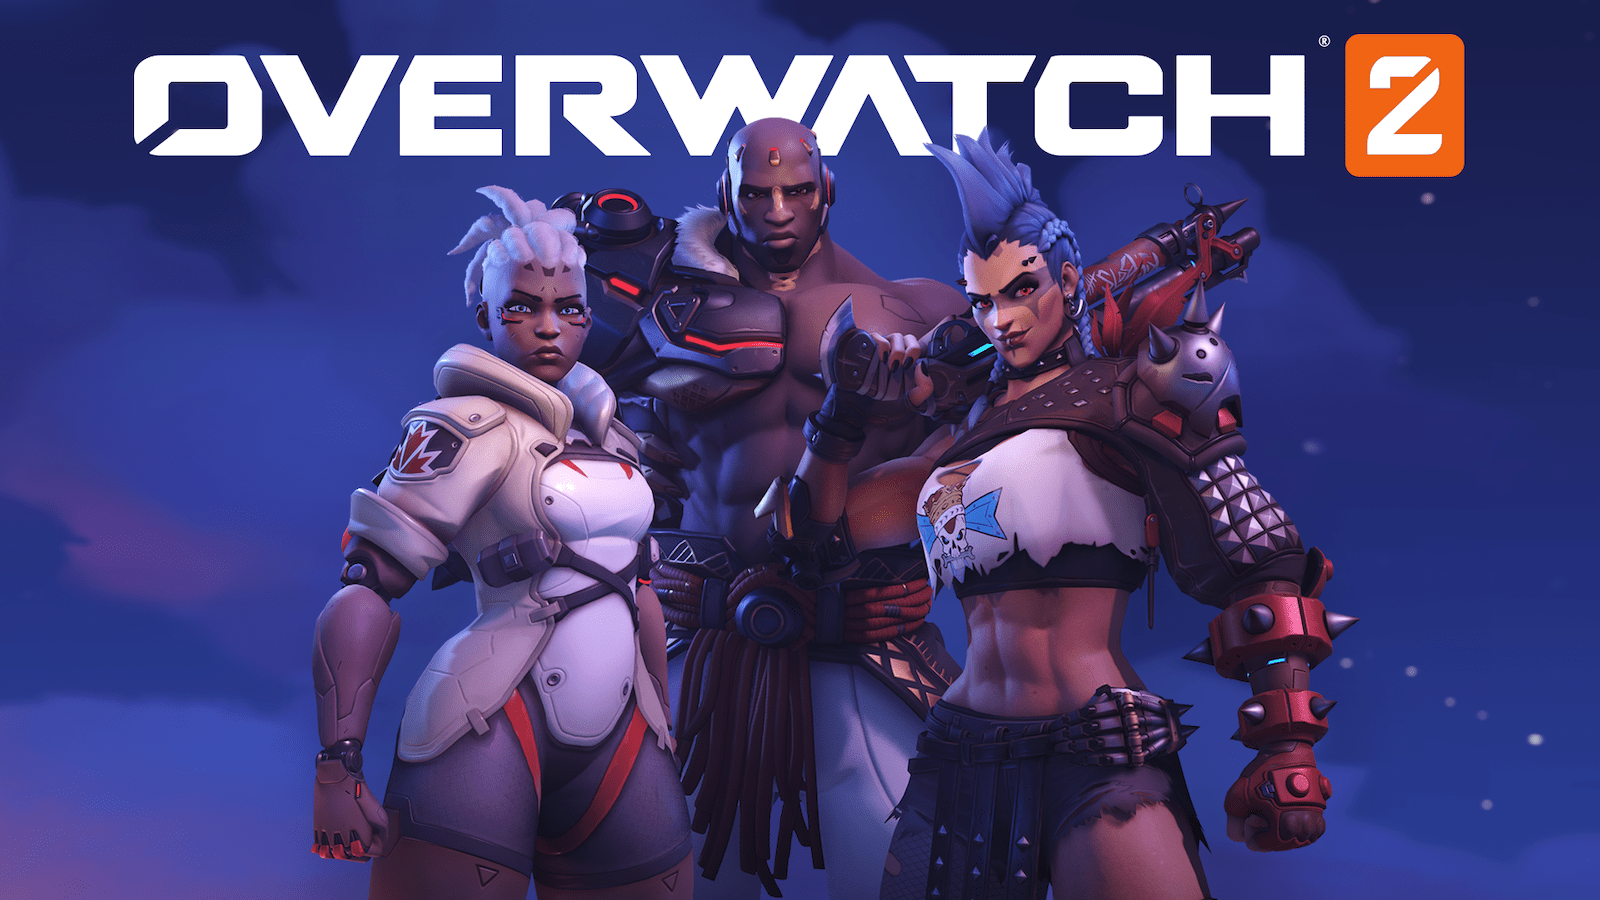 Image of two new Overwatch heroes (Sojourn and Junker Queen) on either side of Doomfist and "Overwatch 2" written at the top